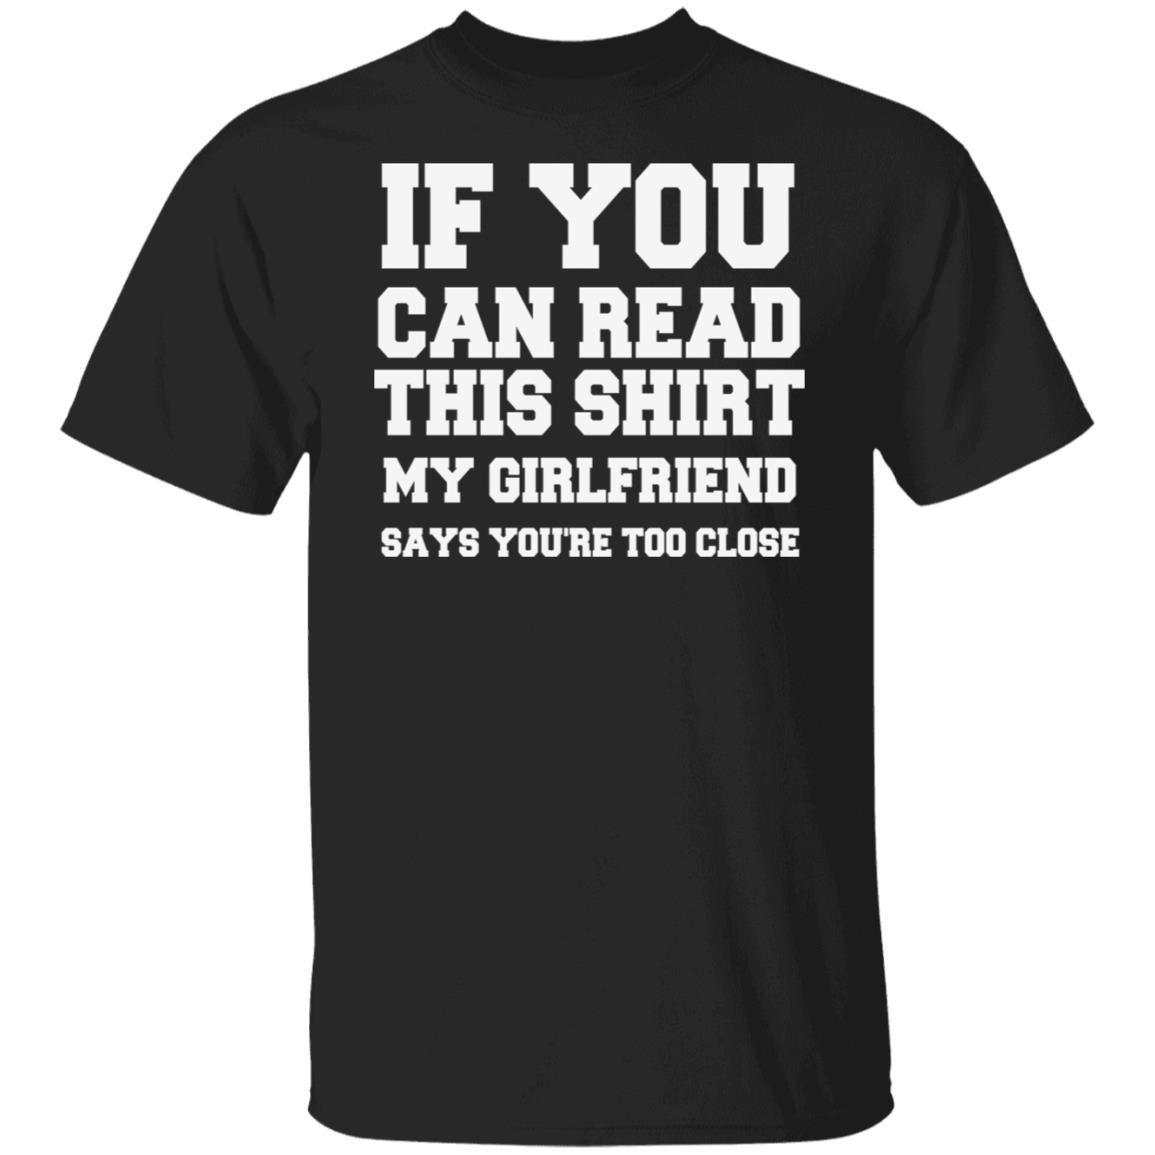 If You Can Read This Shirt My Girlfriend Says You're Too Close Funny Shirt